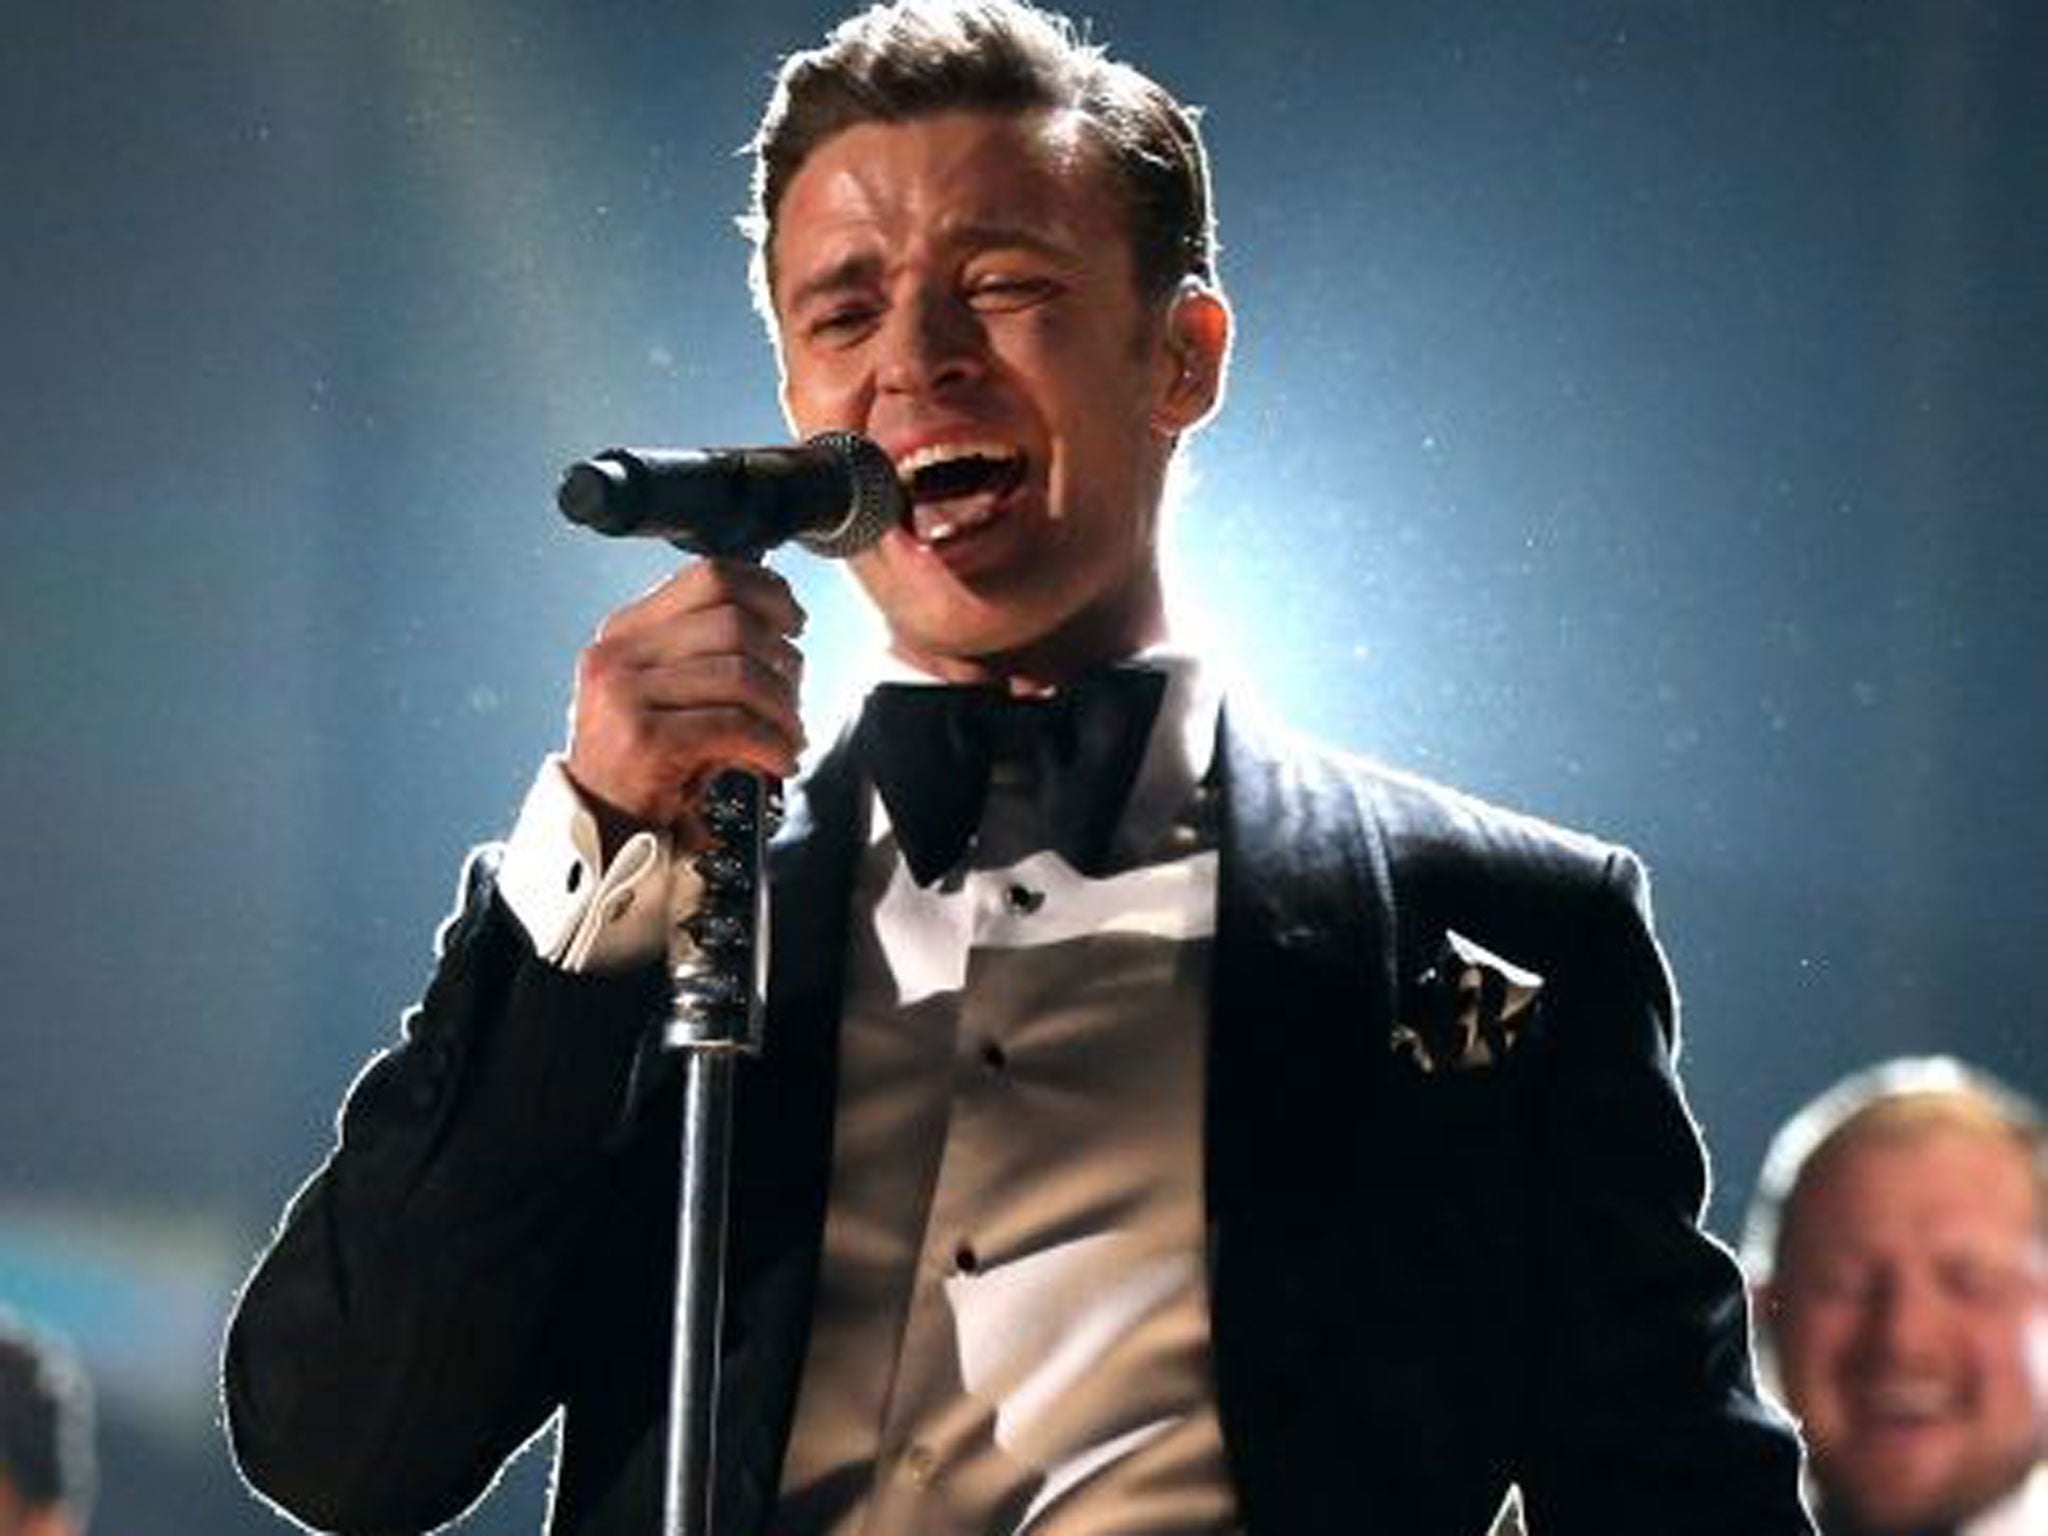 Justin Timberlake has no plans for an album right now: “If it